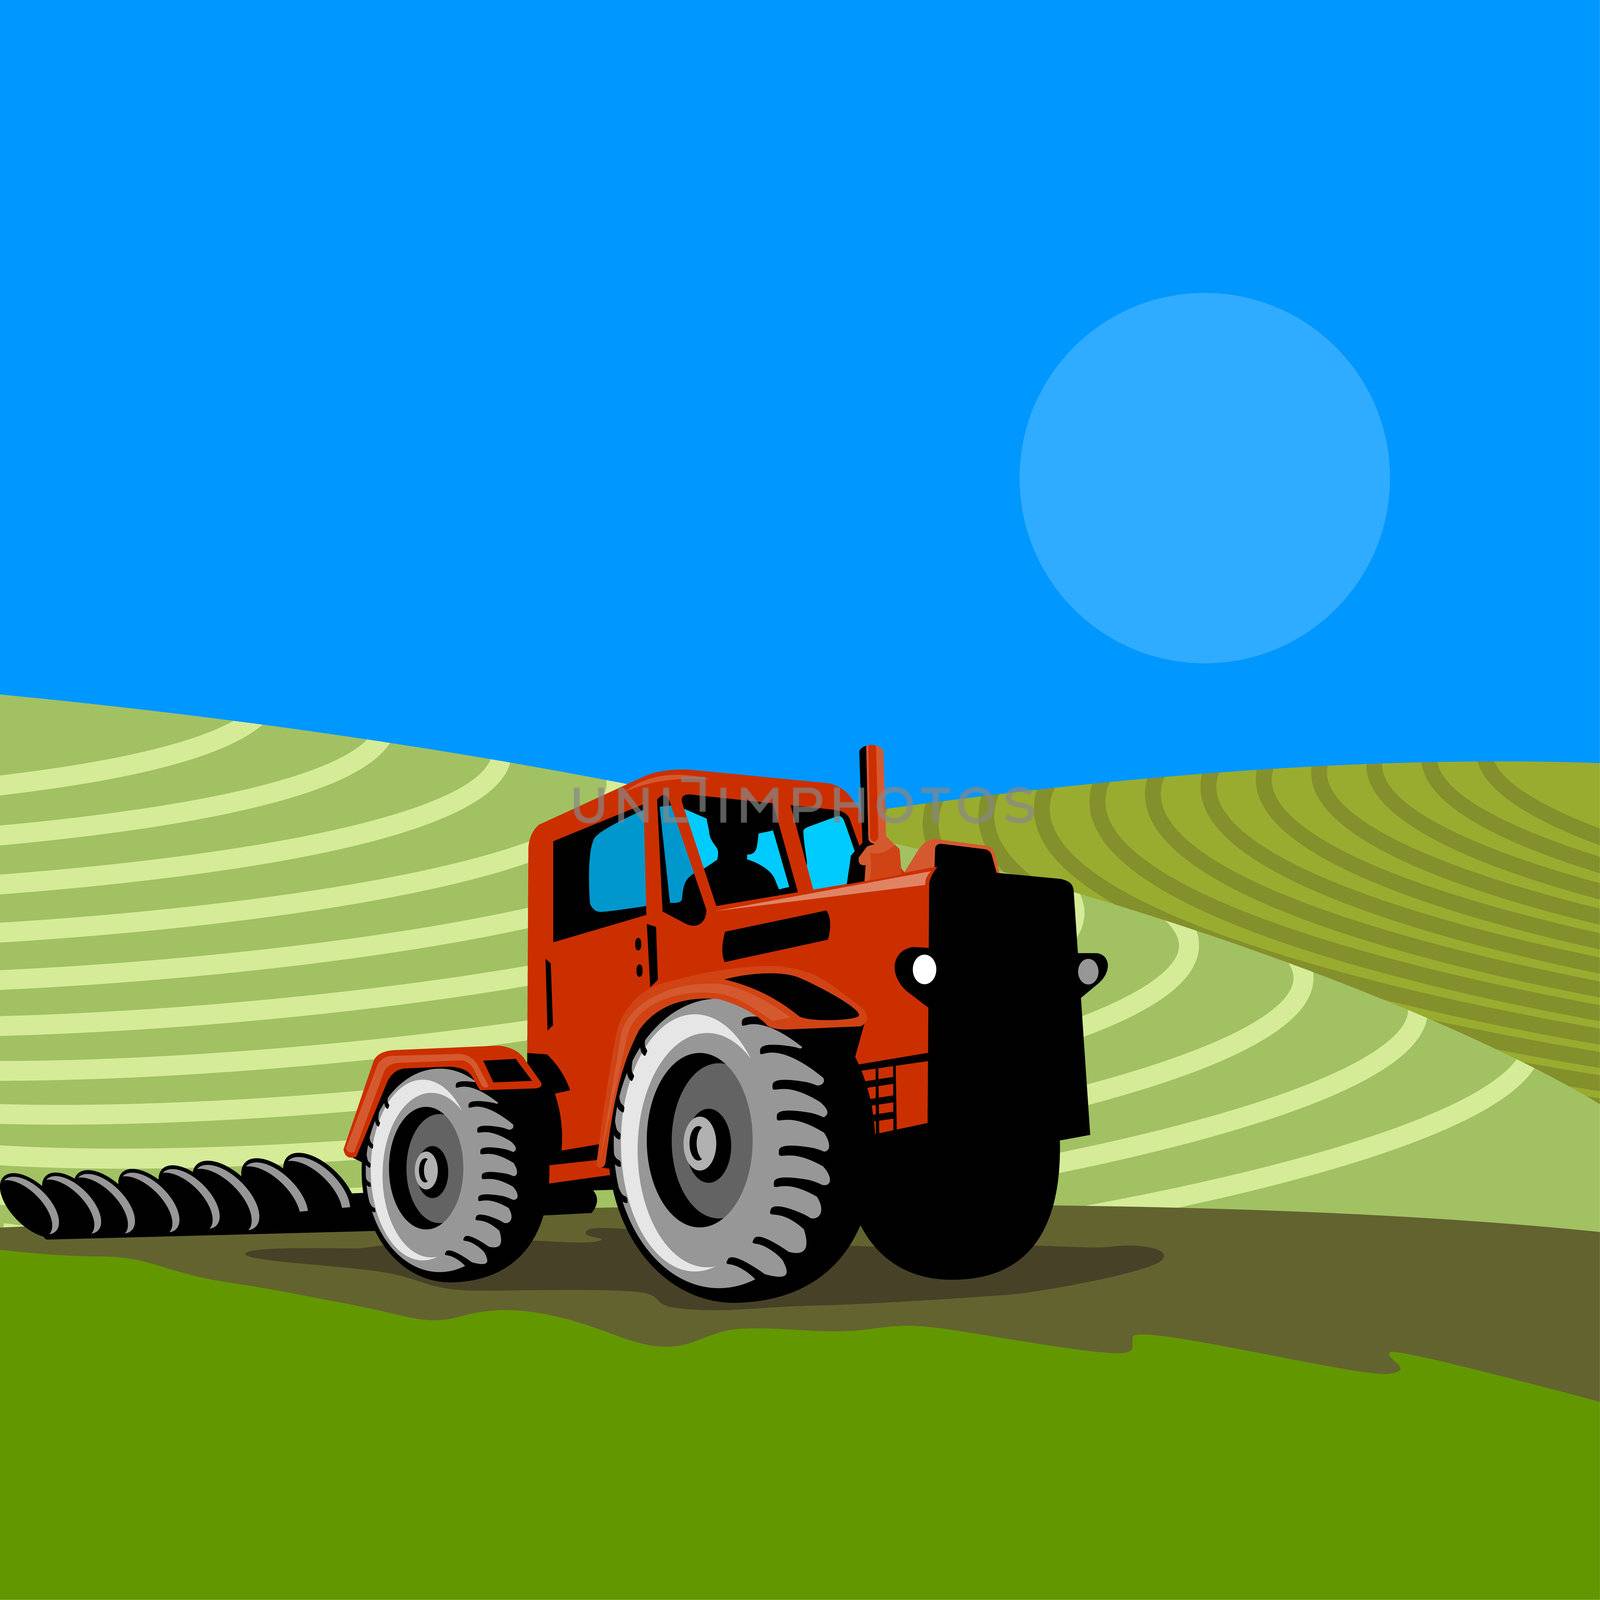 illustration of a vintage farm tractor on isolated background done in retro style